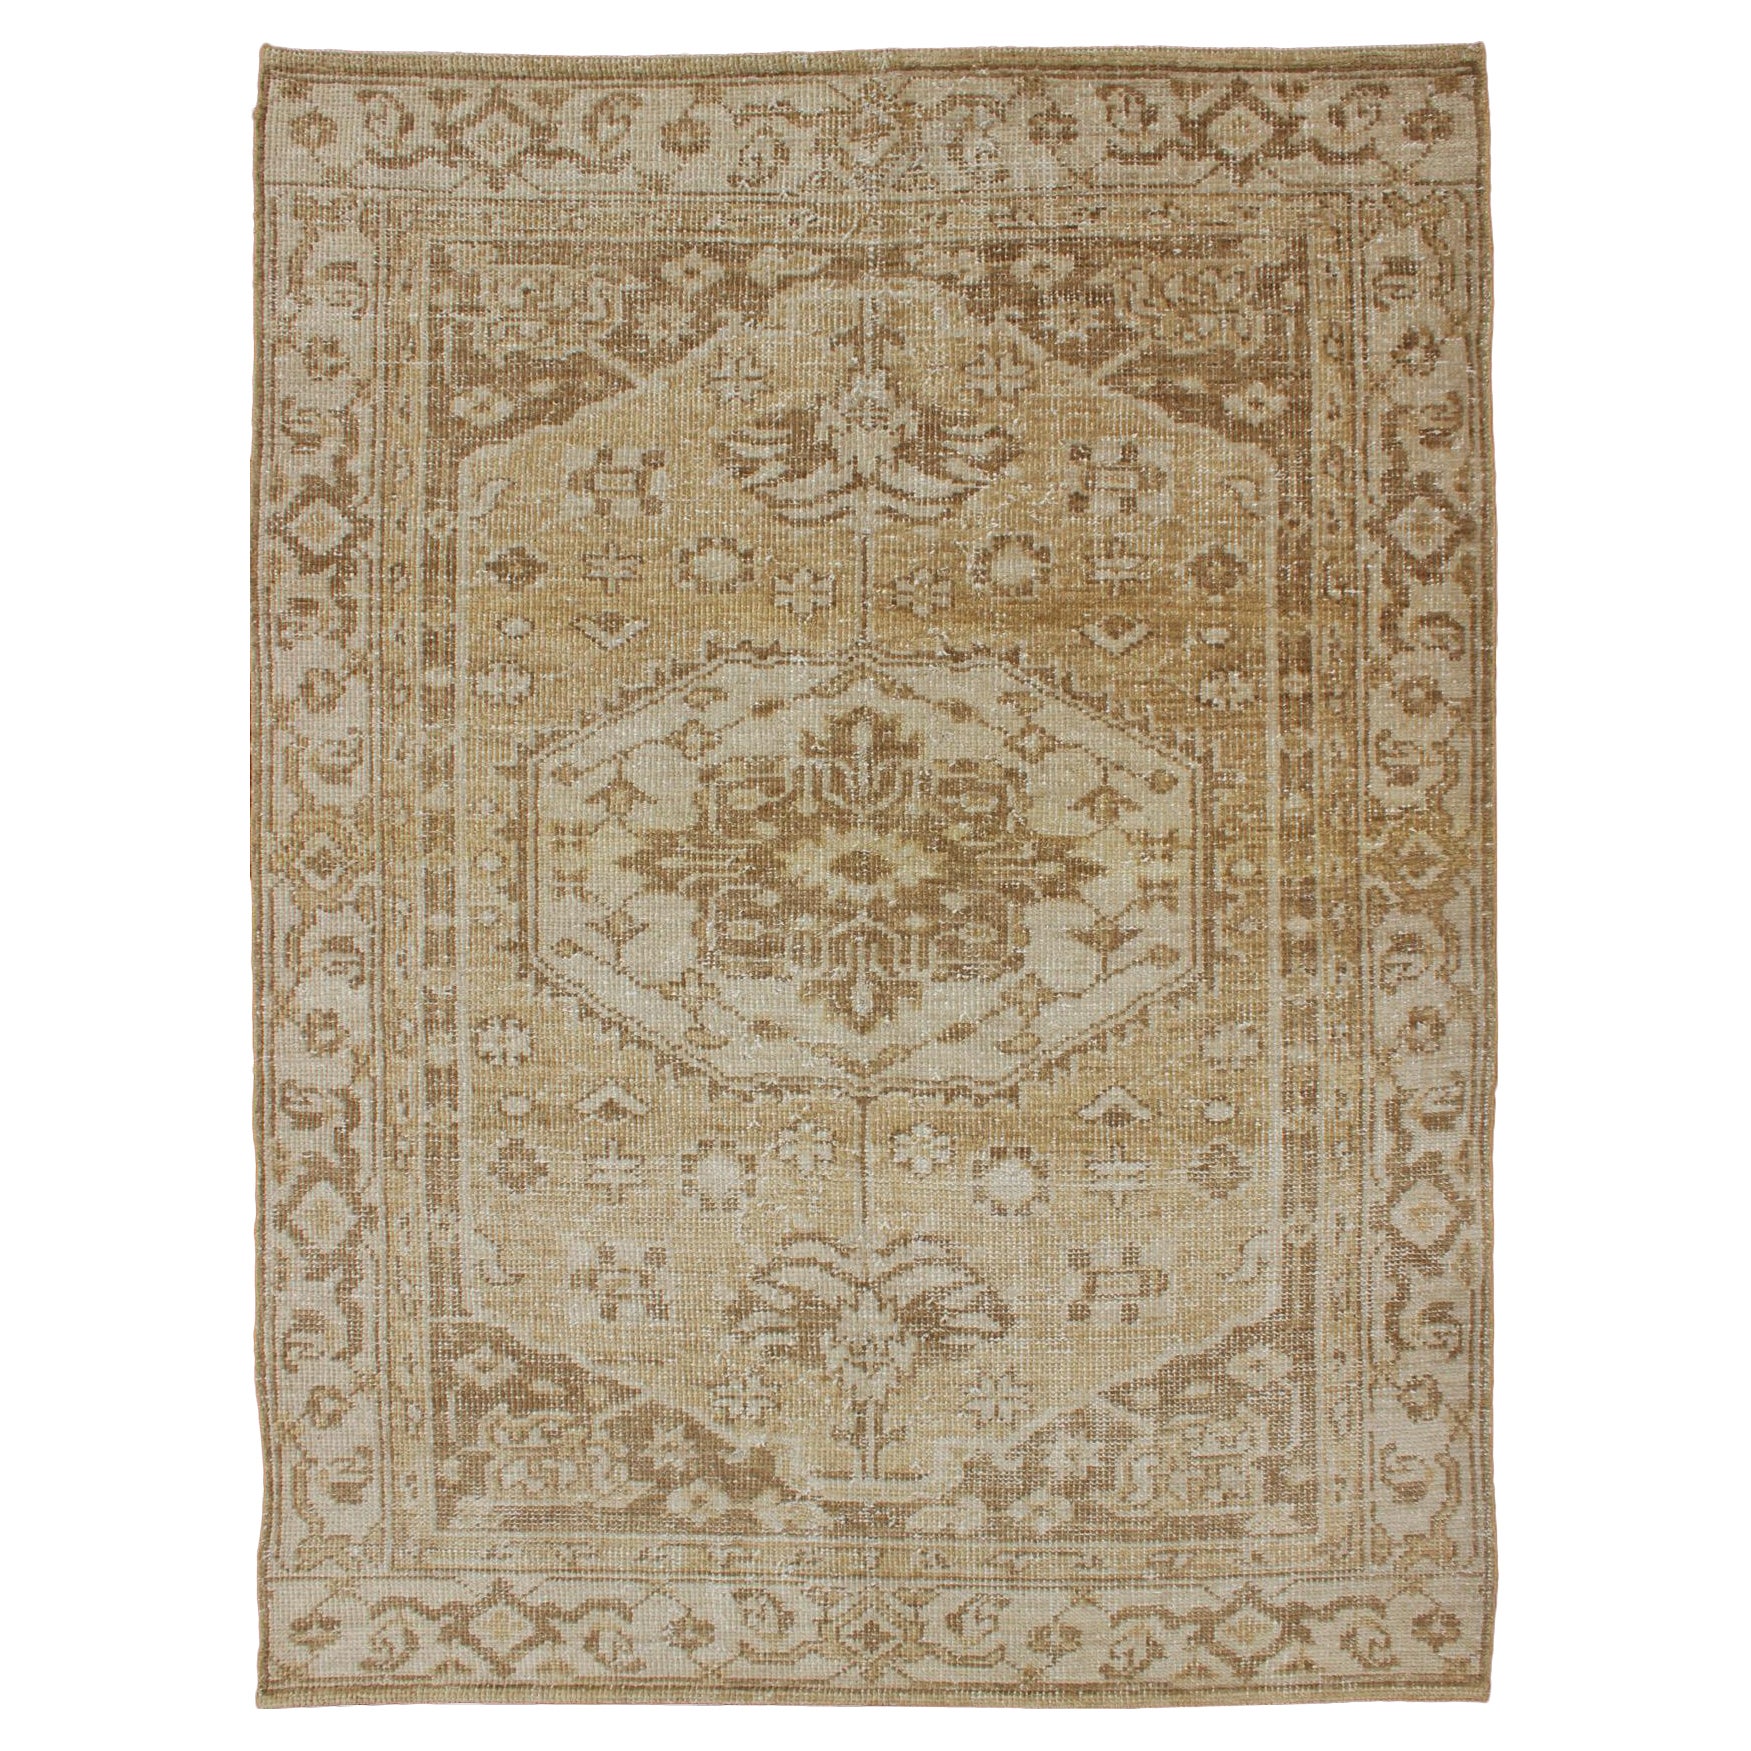 Medallion Design Oushak with Brown, Yellow, Golden Brown, and Cream